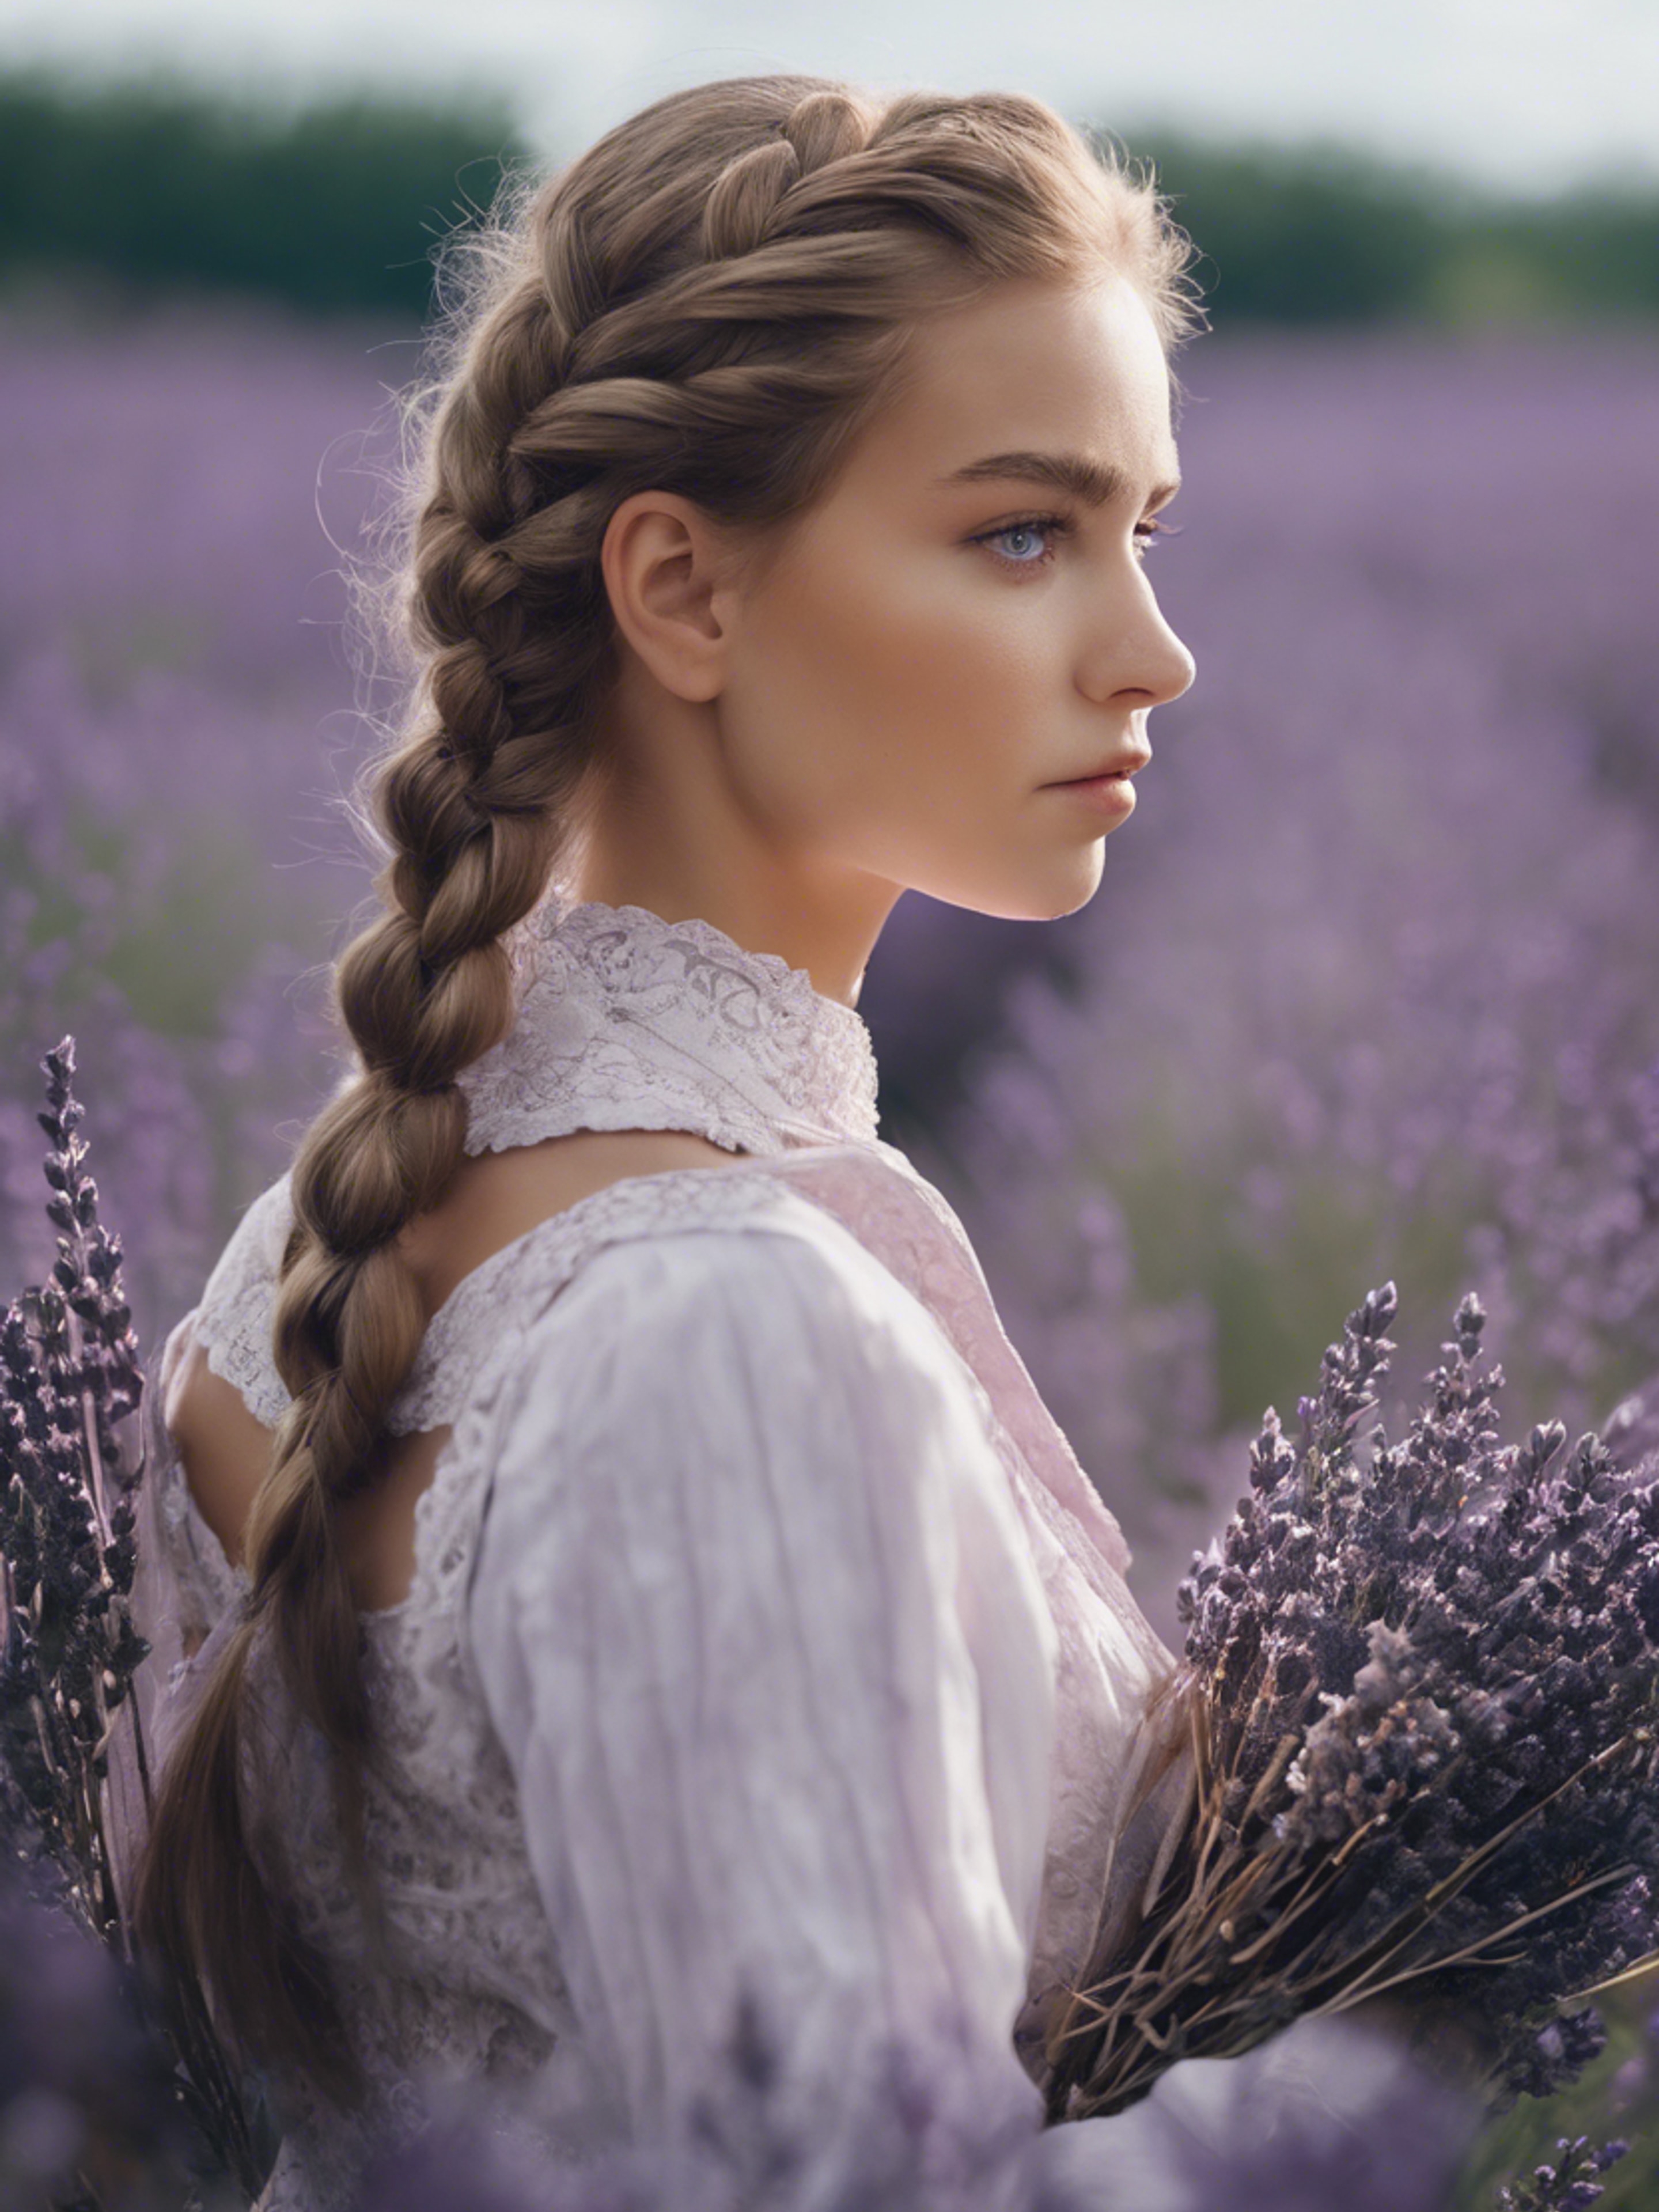 A pretty, light-eyed girl with her hair done in classic French braid, surrounded by a field of French lavender. Обои[c71d23e36c7041a09435]